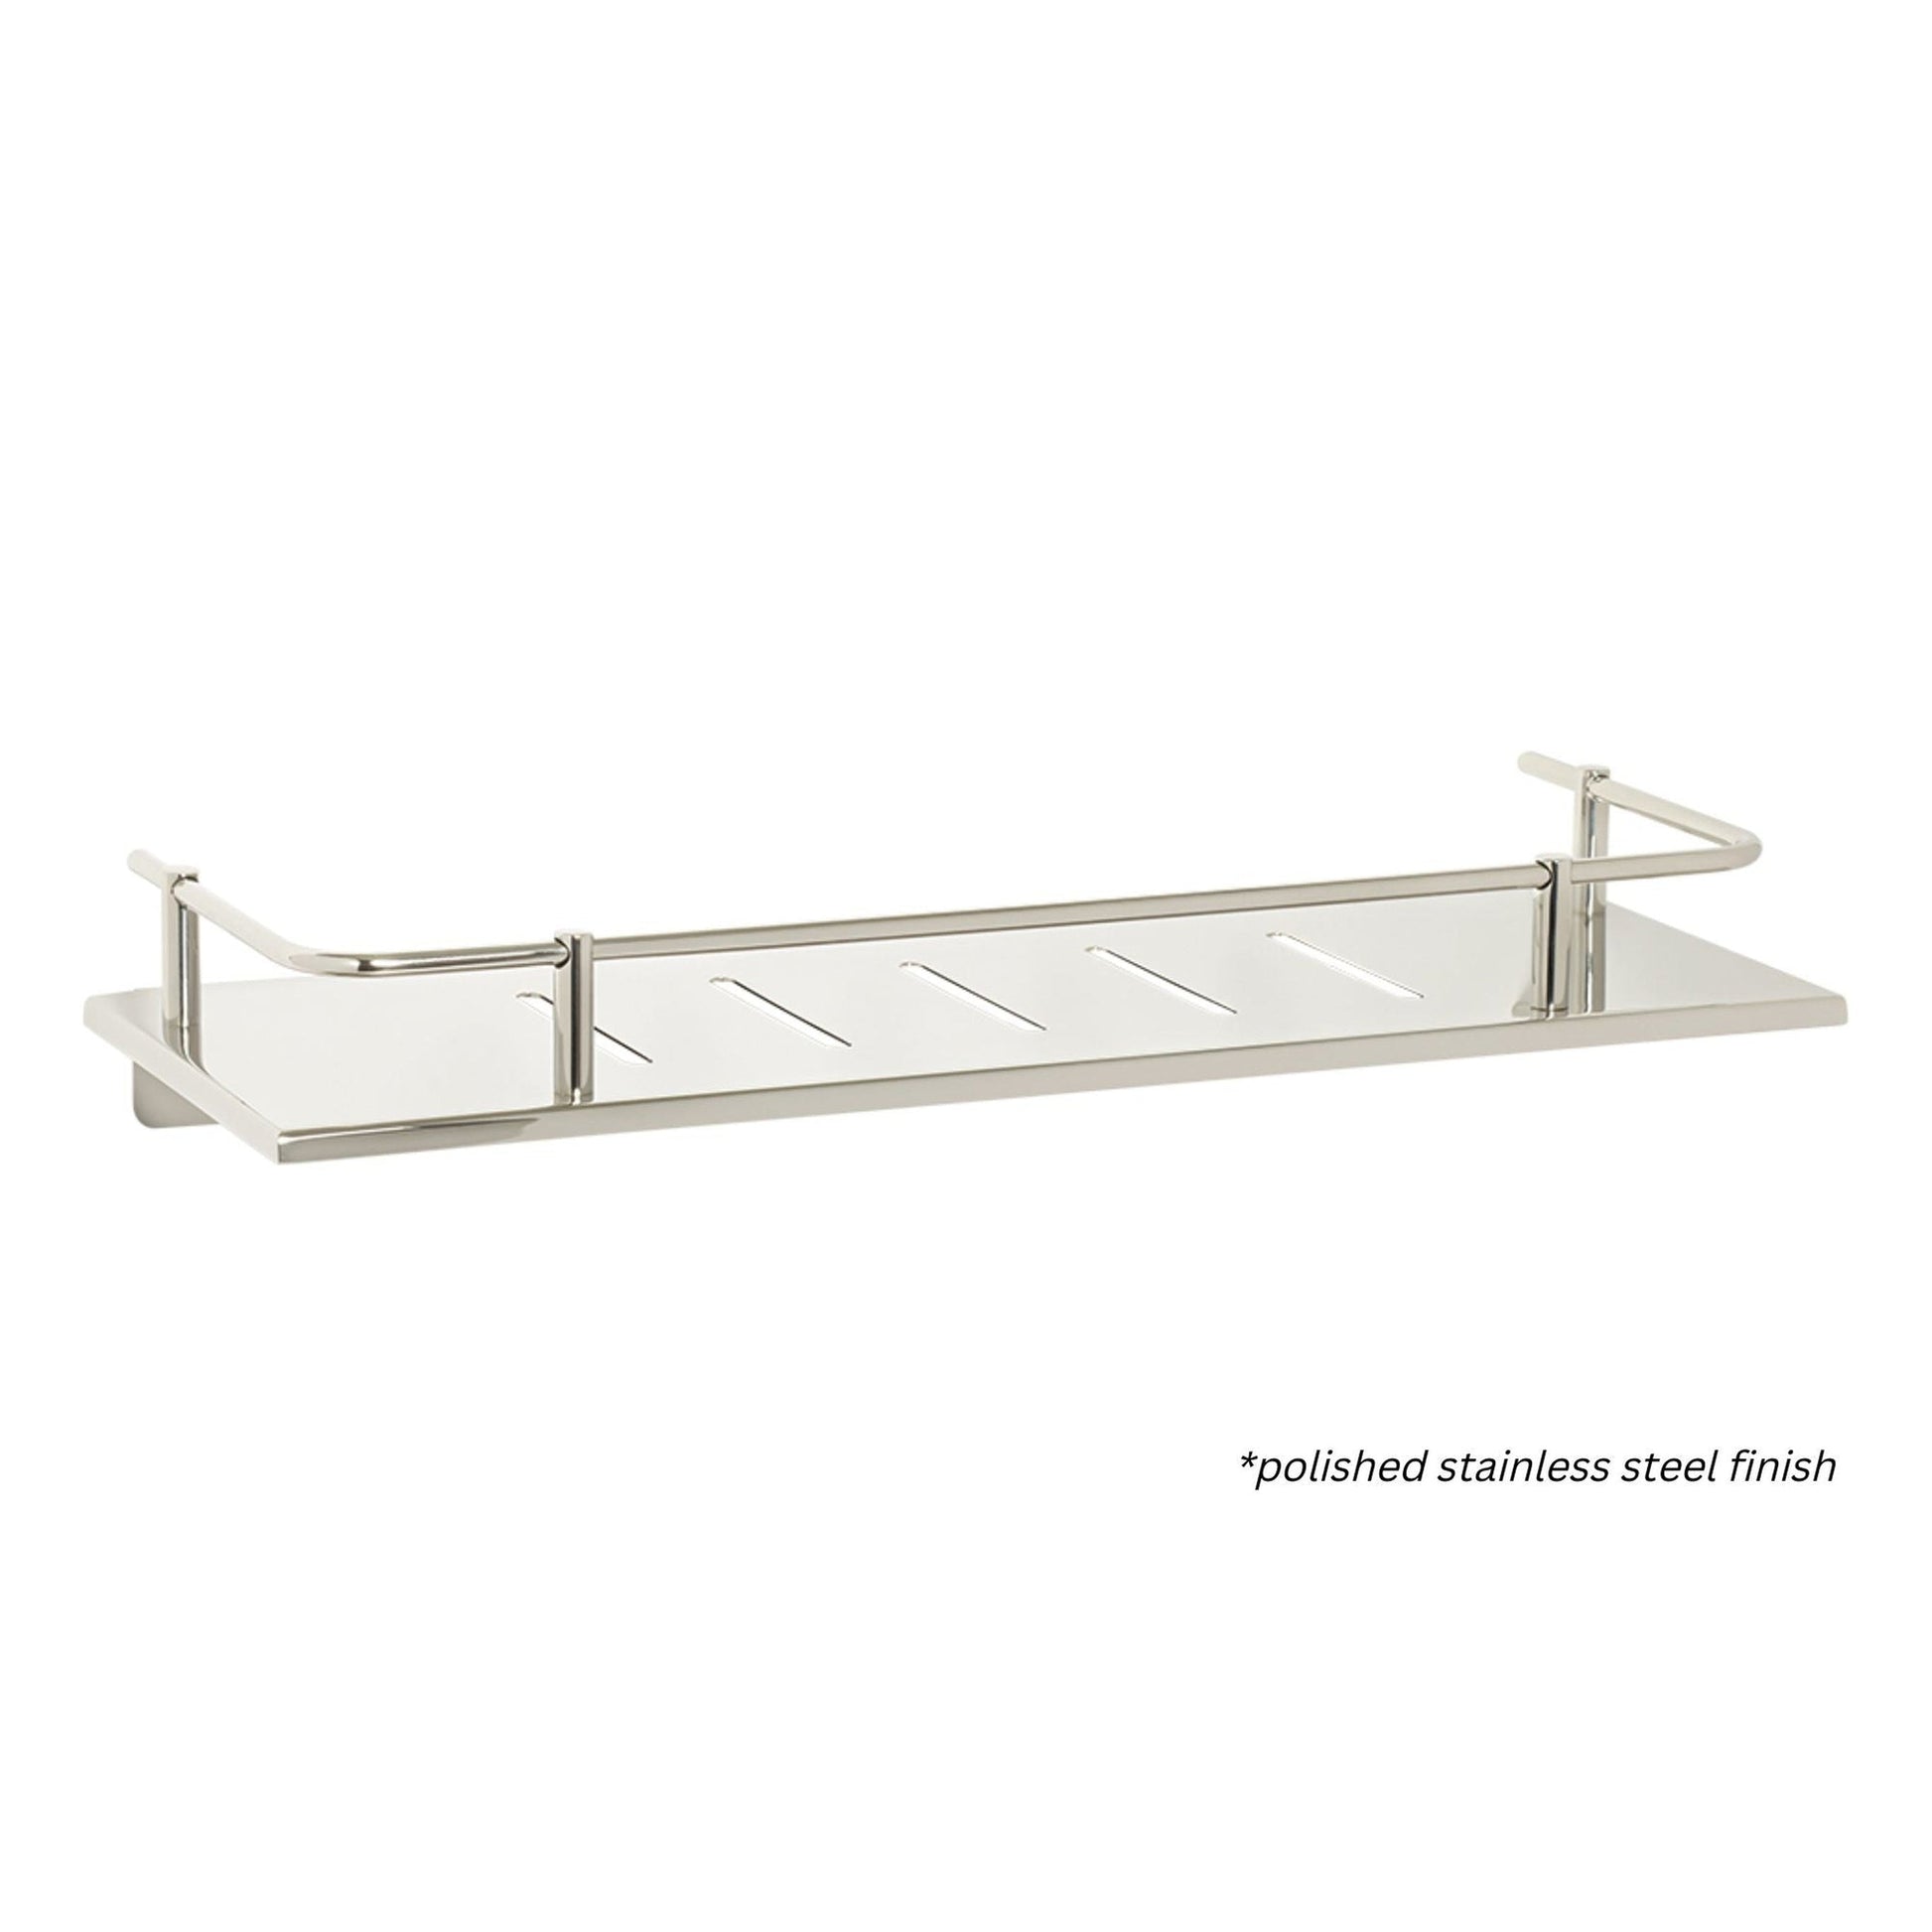 Seachrome Lifestyle and Wellness 720 Series 16" x 6" Rectangular Sundries Shower Shelf With Rail in Almond Powder Coated Stainless Finish